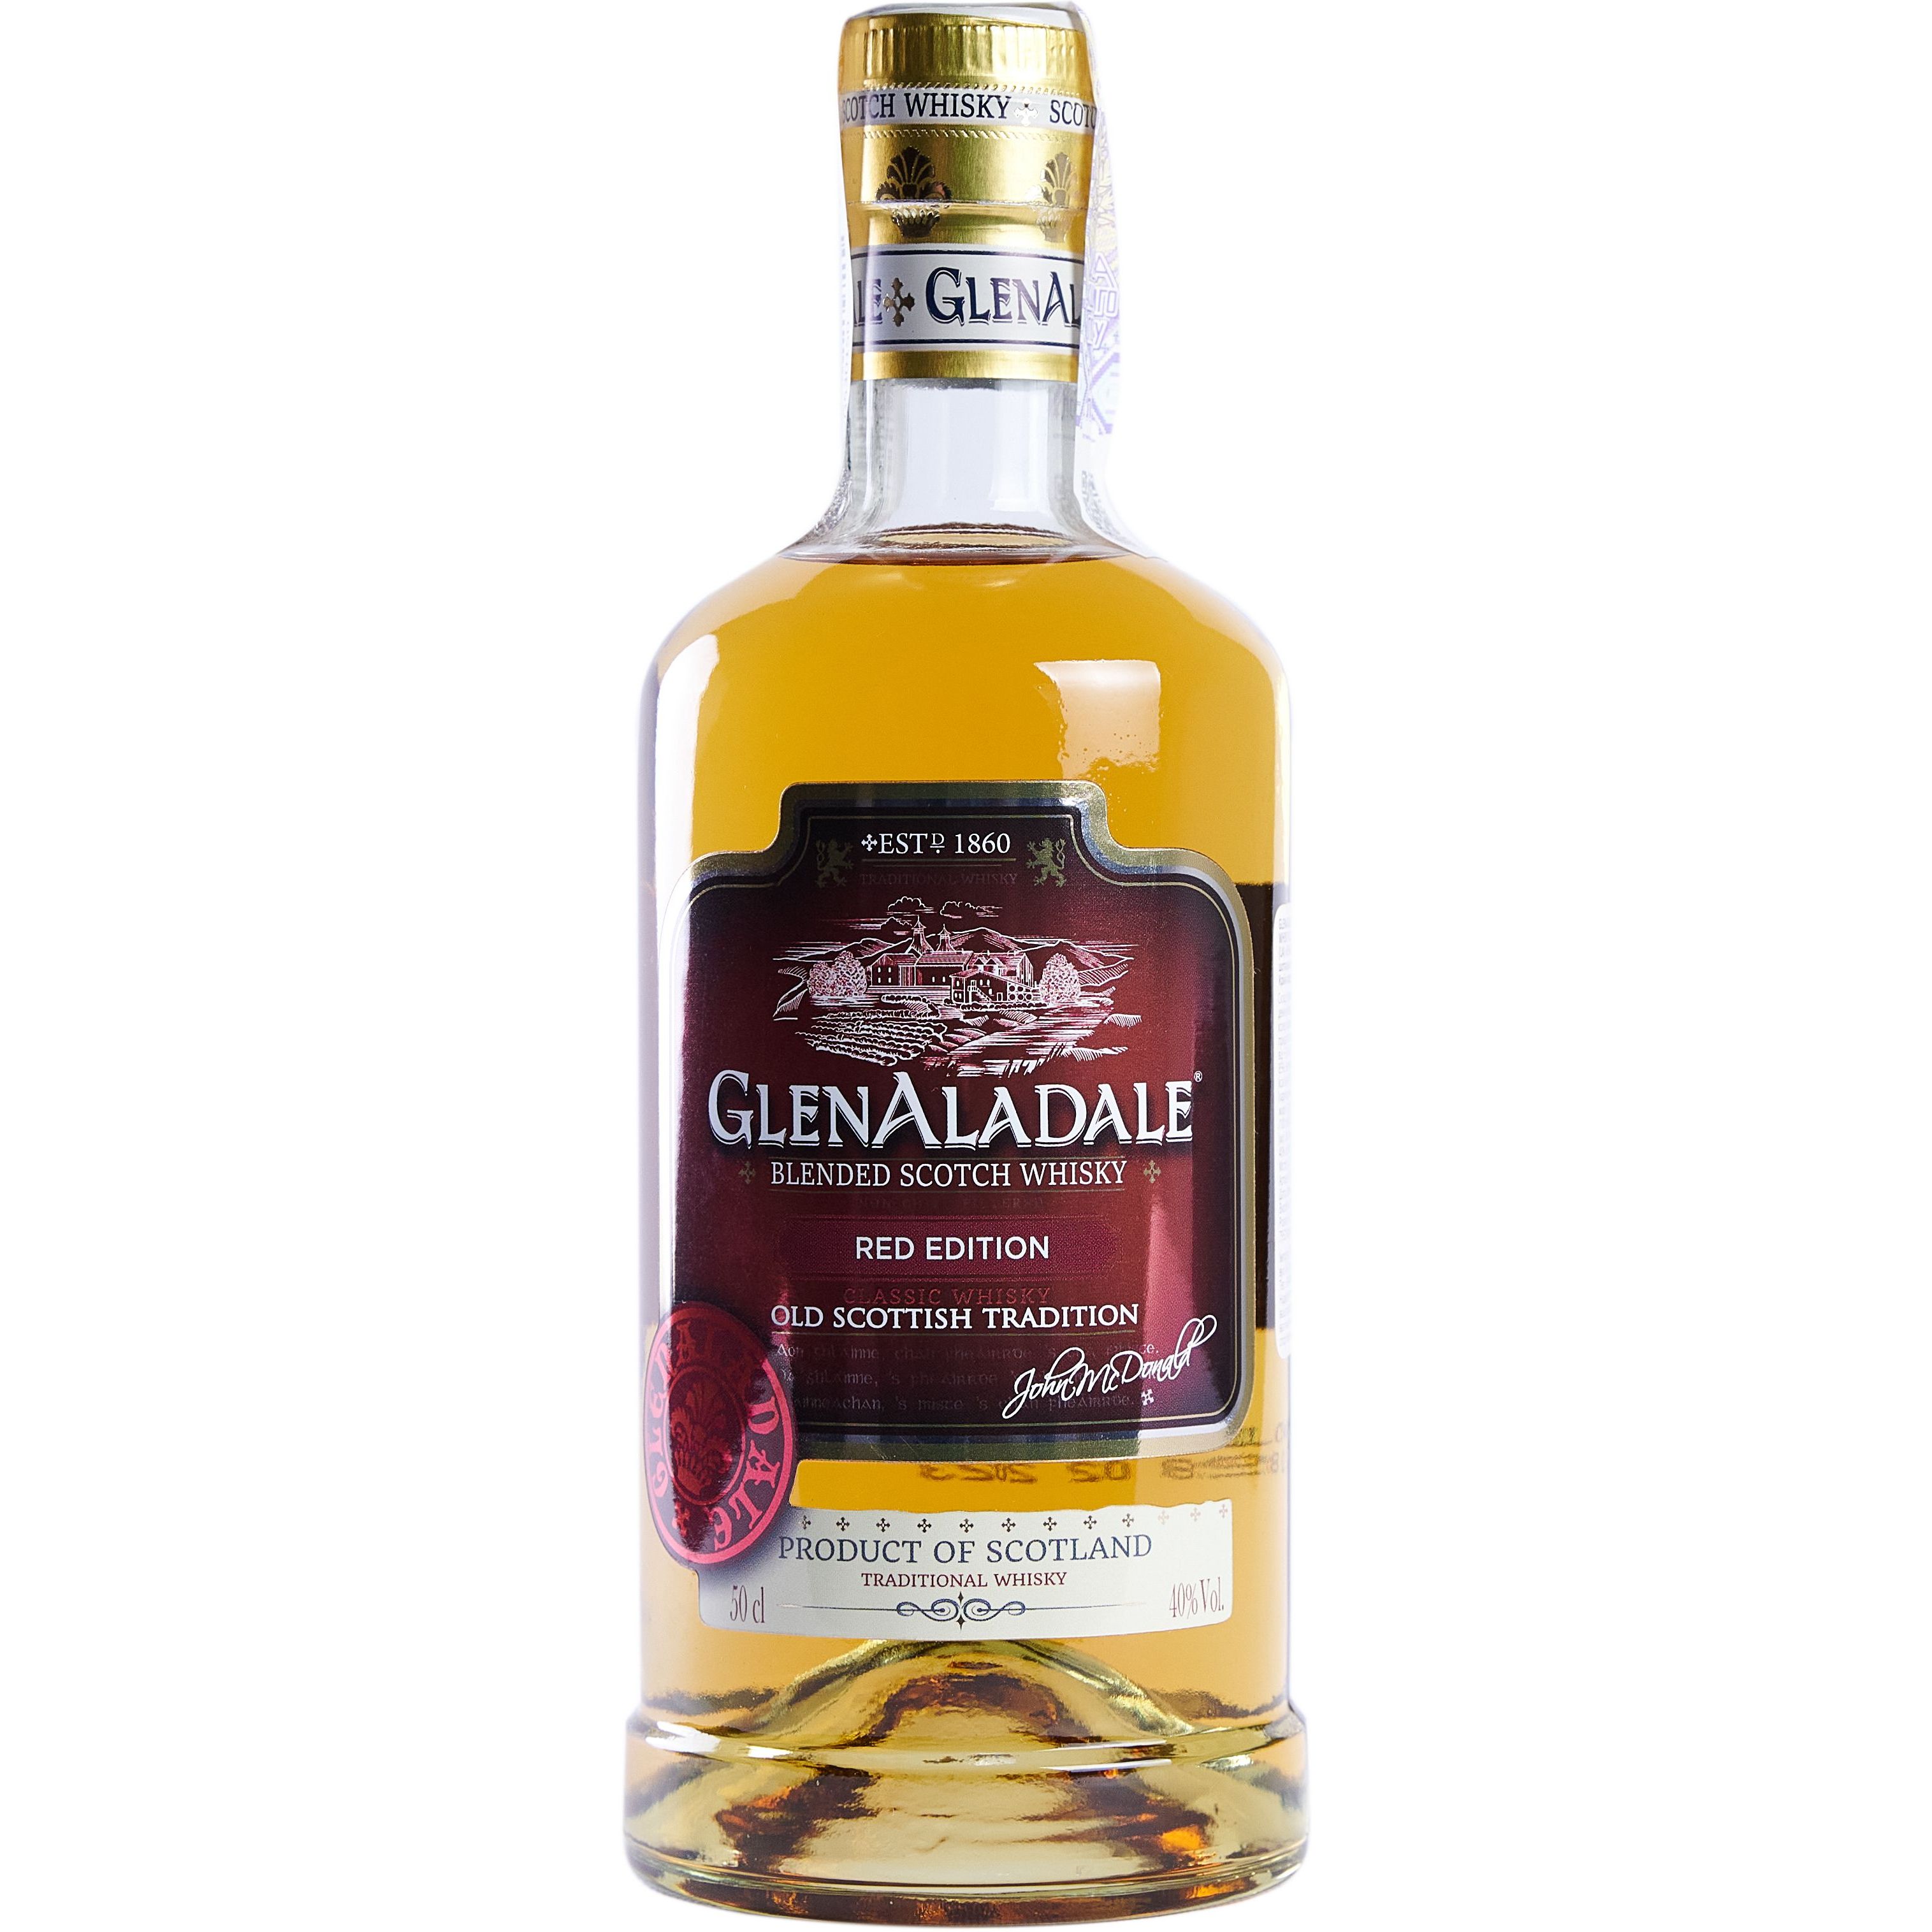 Виски GlenAladale Red Edition Blended Scotch Whisky 40% 0.5 л (ALR16662) - фото 1